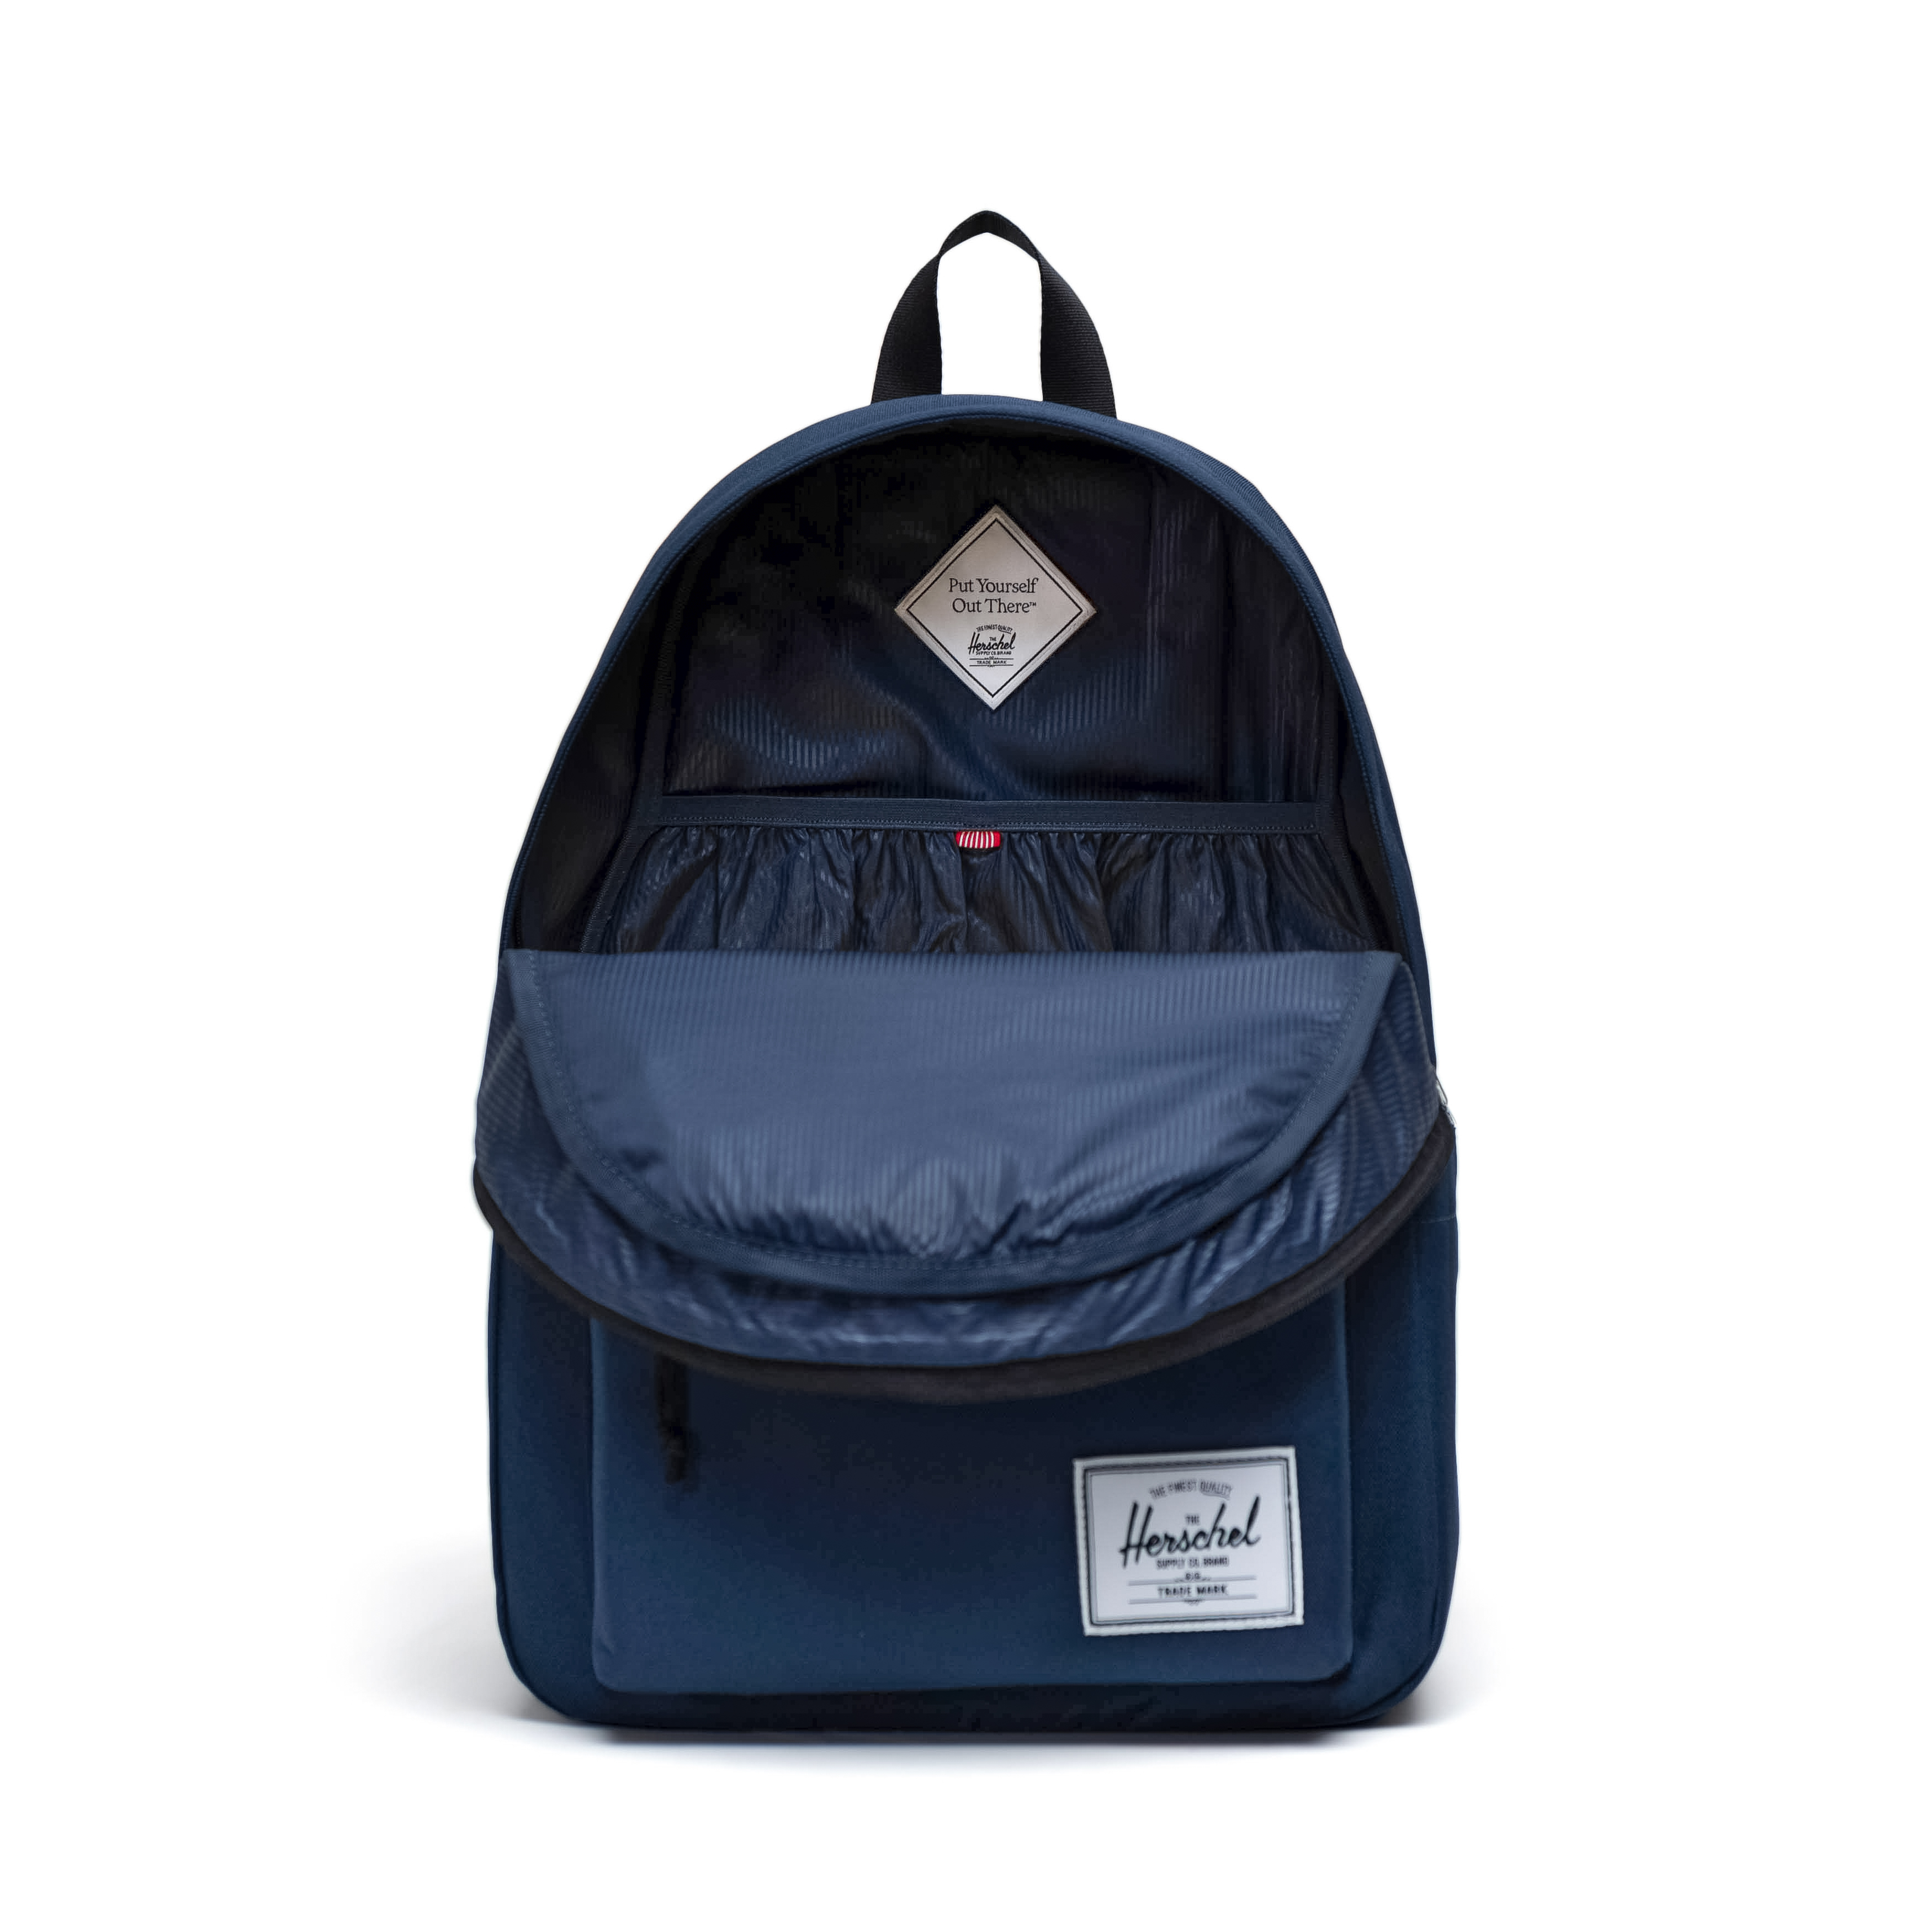 XL Campus Backpack in Classic Navy